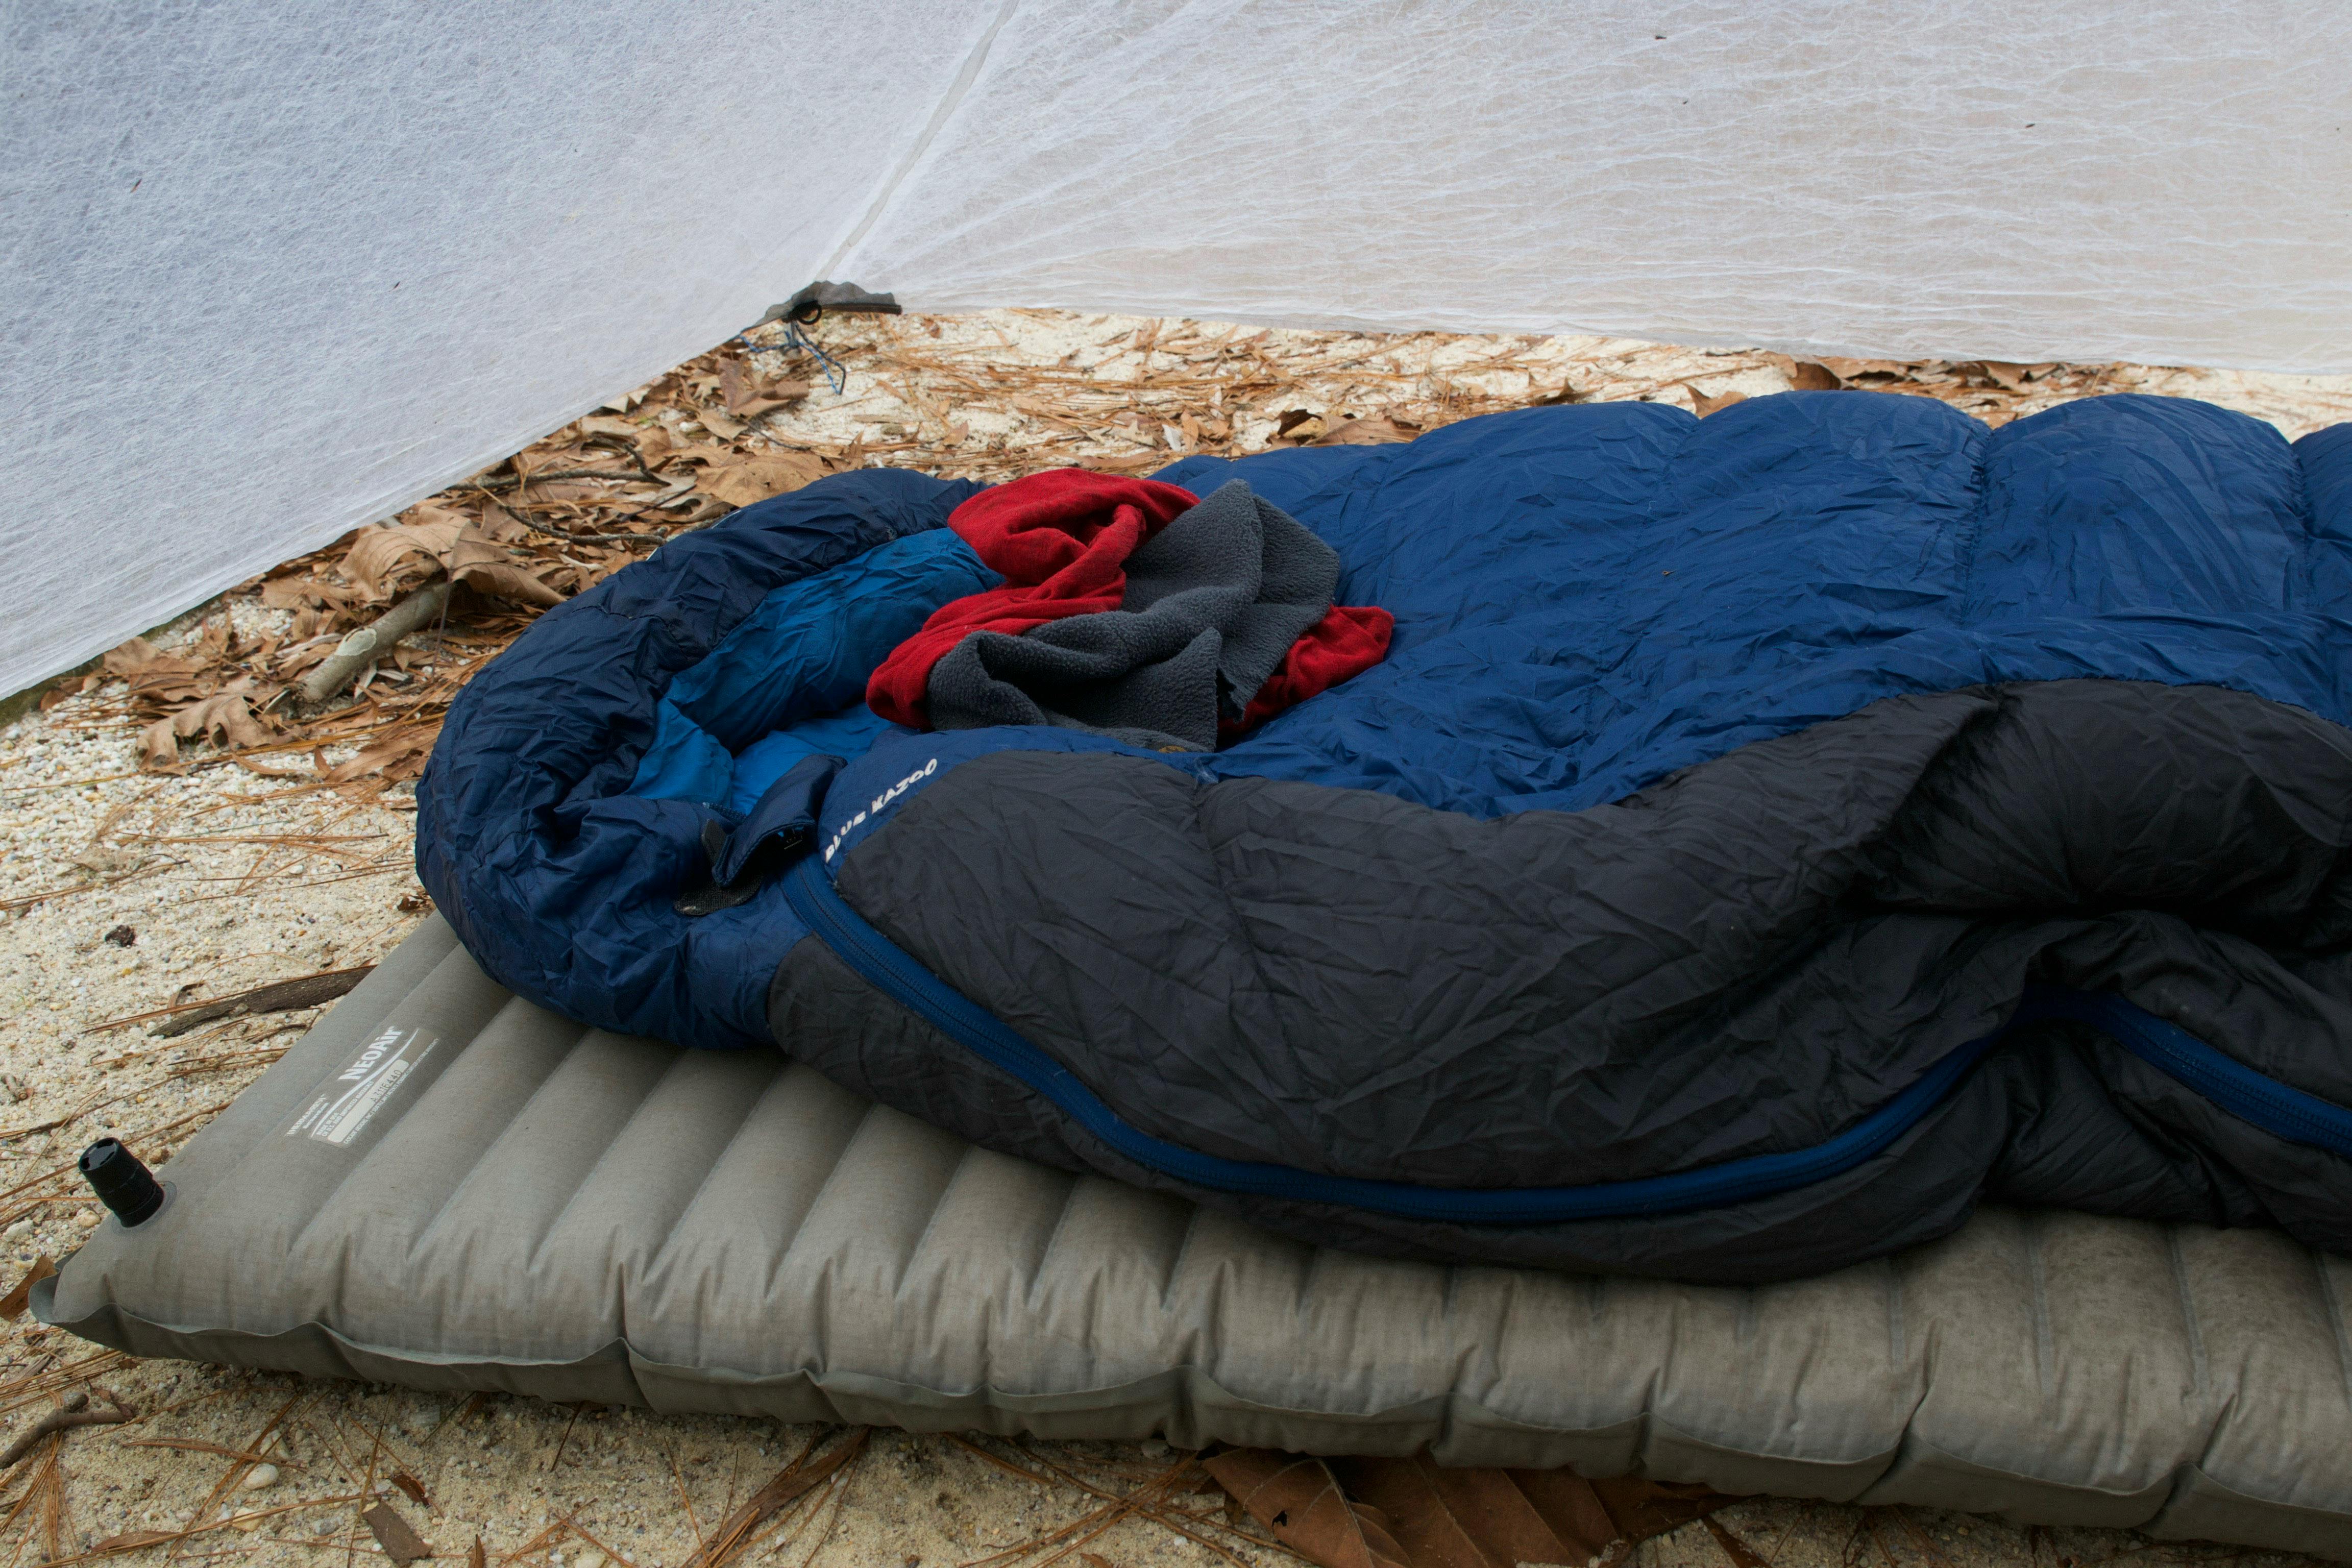 A sleeping bag and a sleeping pad lie on the ground. The sleeping bag is blue.